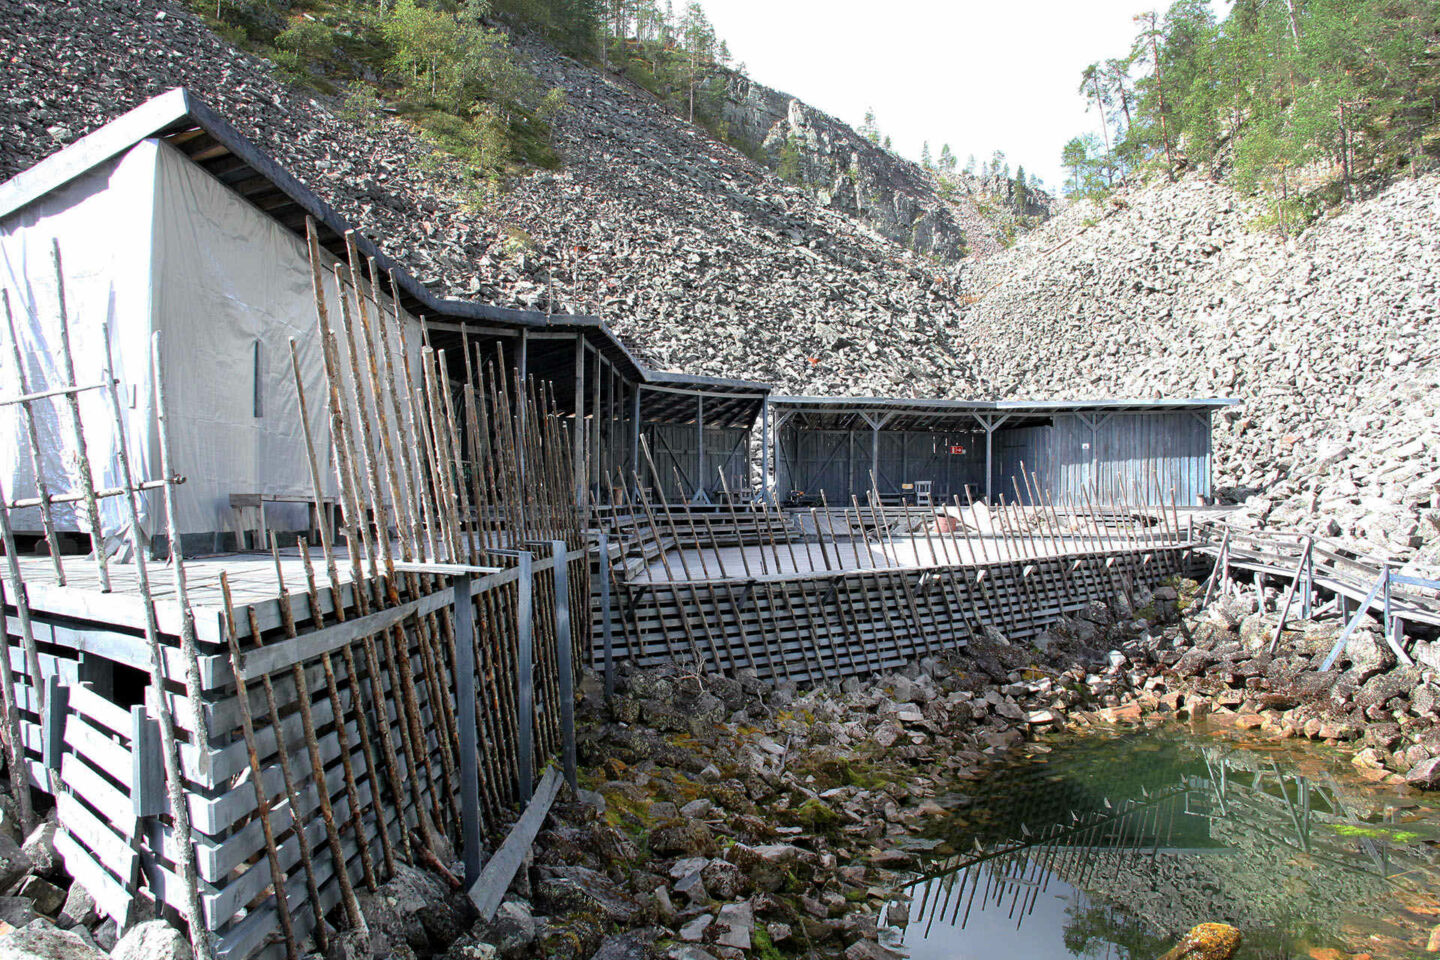 Buildings among the stony gorge in Pyhä in Pelkosenniemi, a filming location in Finnish Lapland